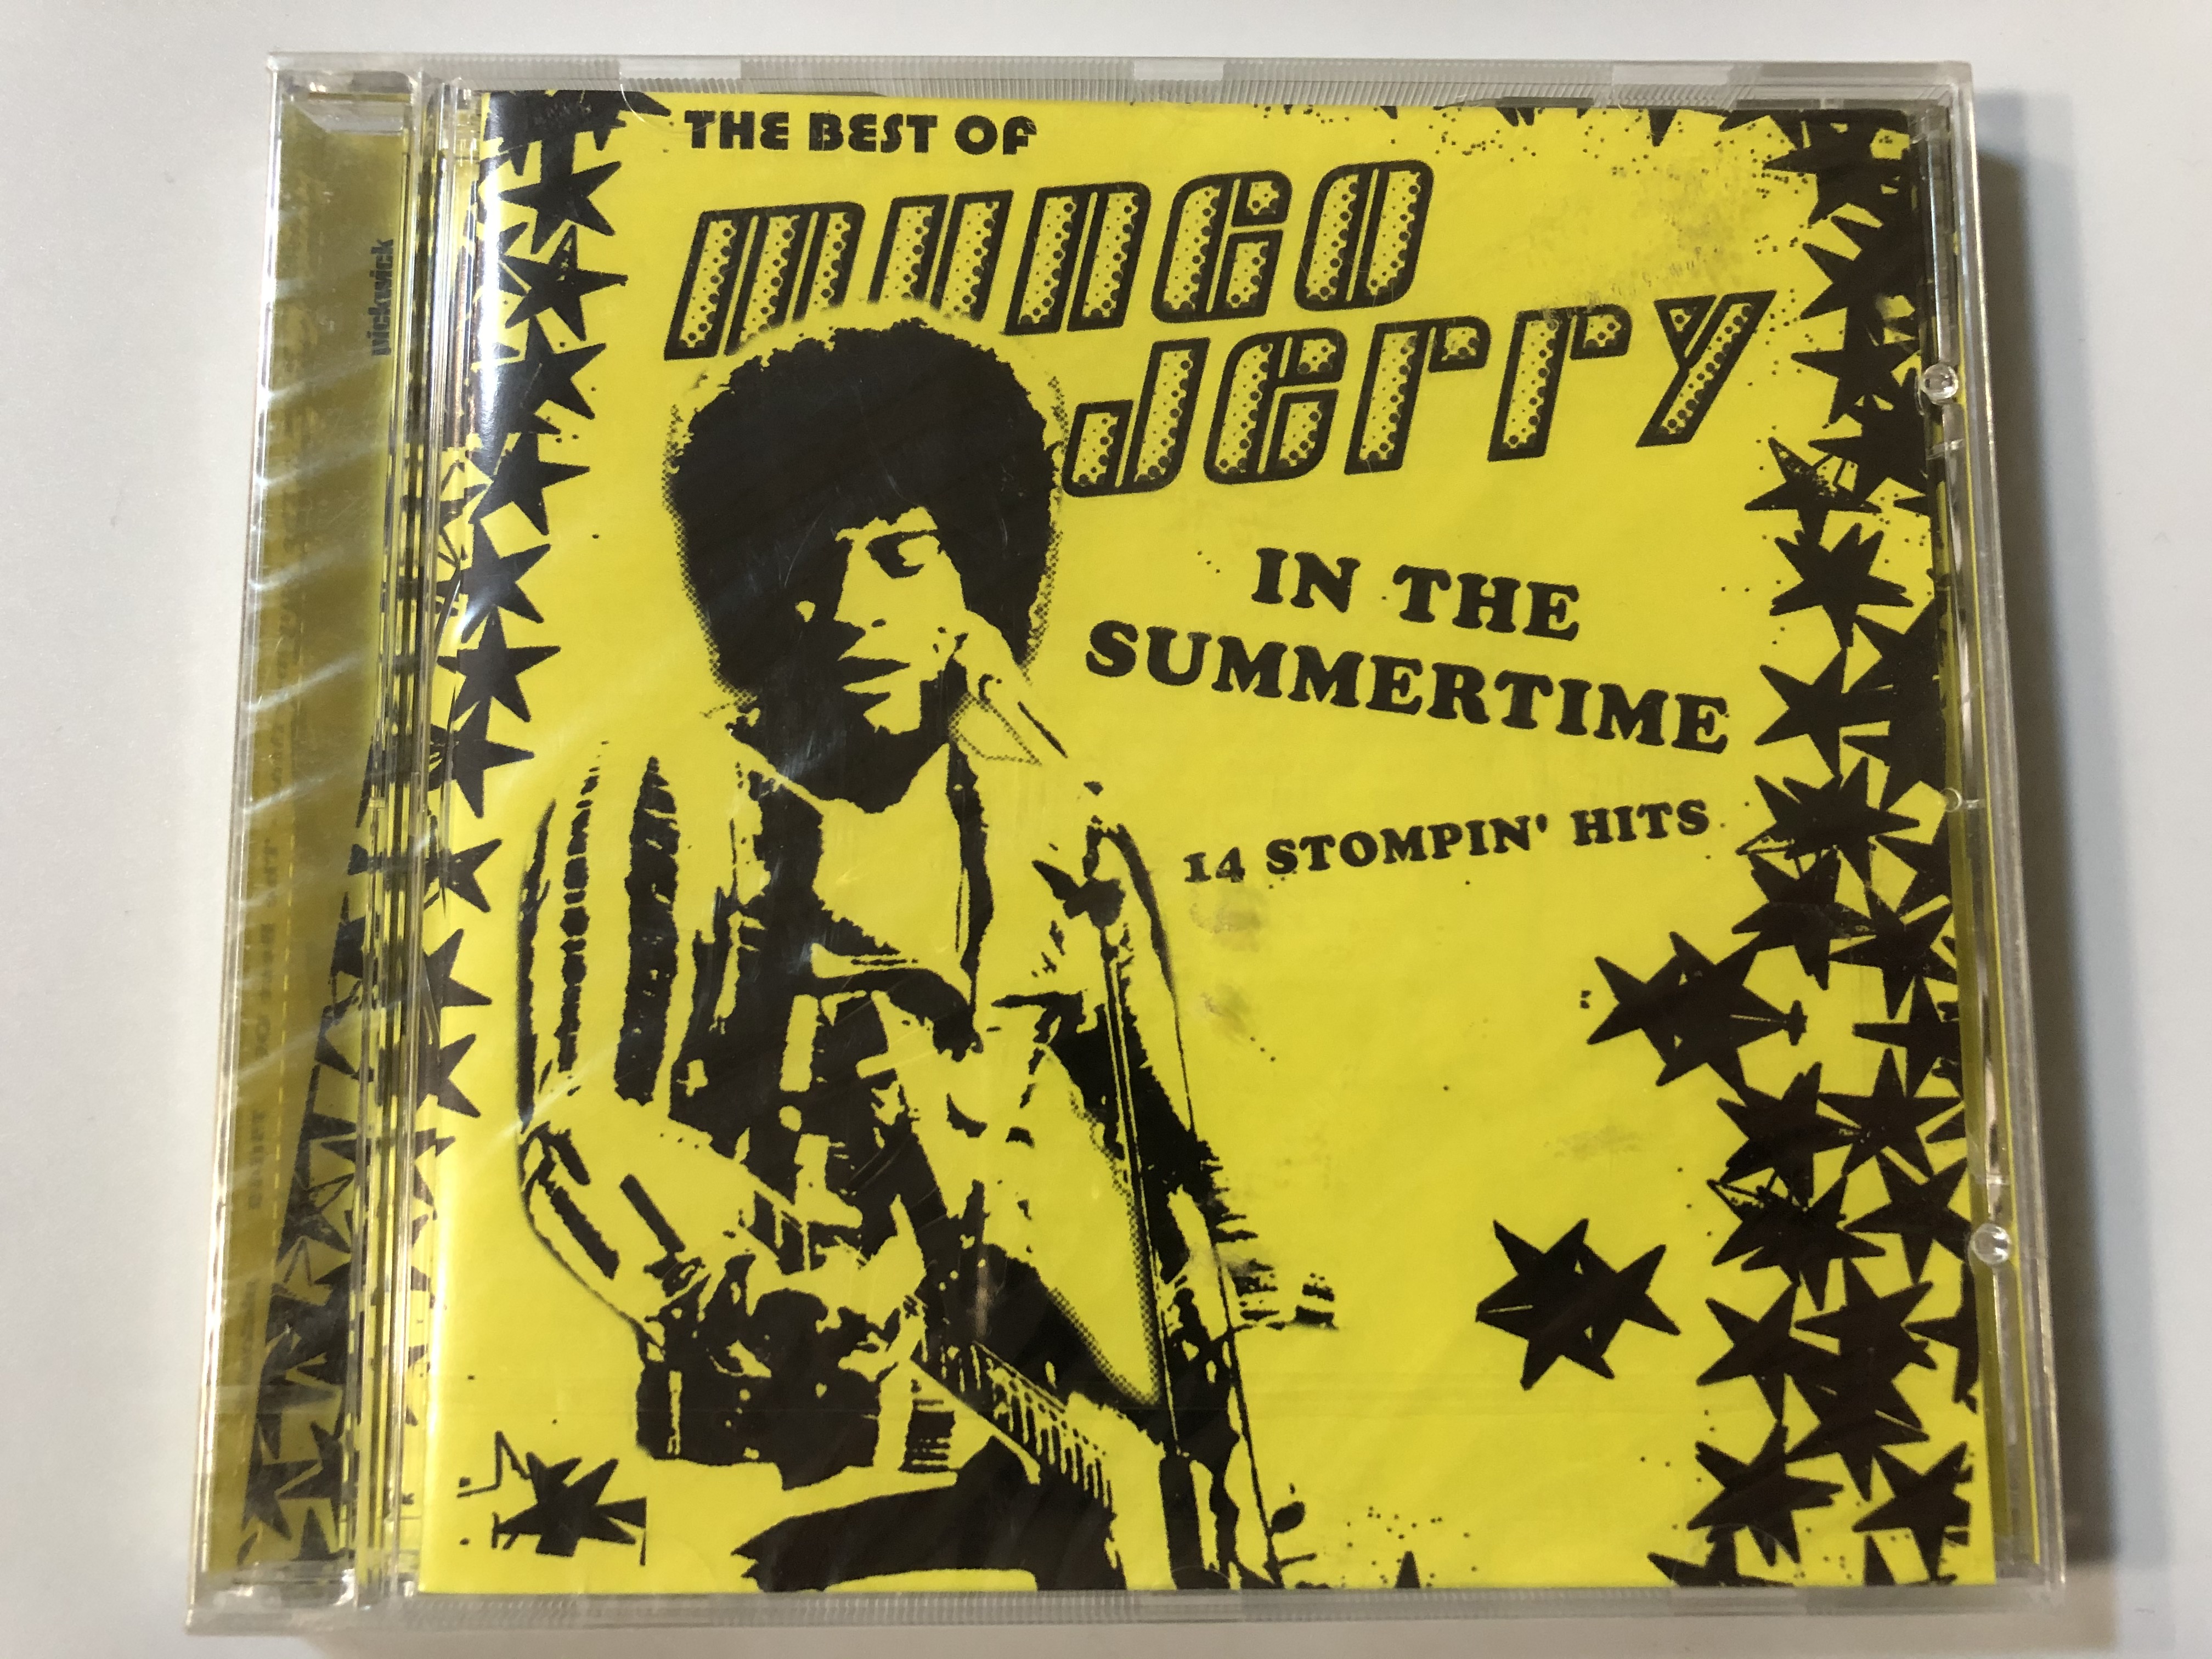 the-best-of-mungo-jerry-in-the-summertime-14-stompin-hits-pickwick-group-limited-audio-cd-2003-751142-1-.jpg